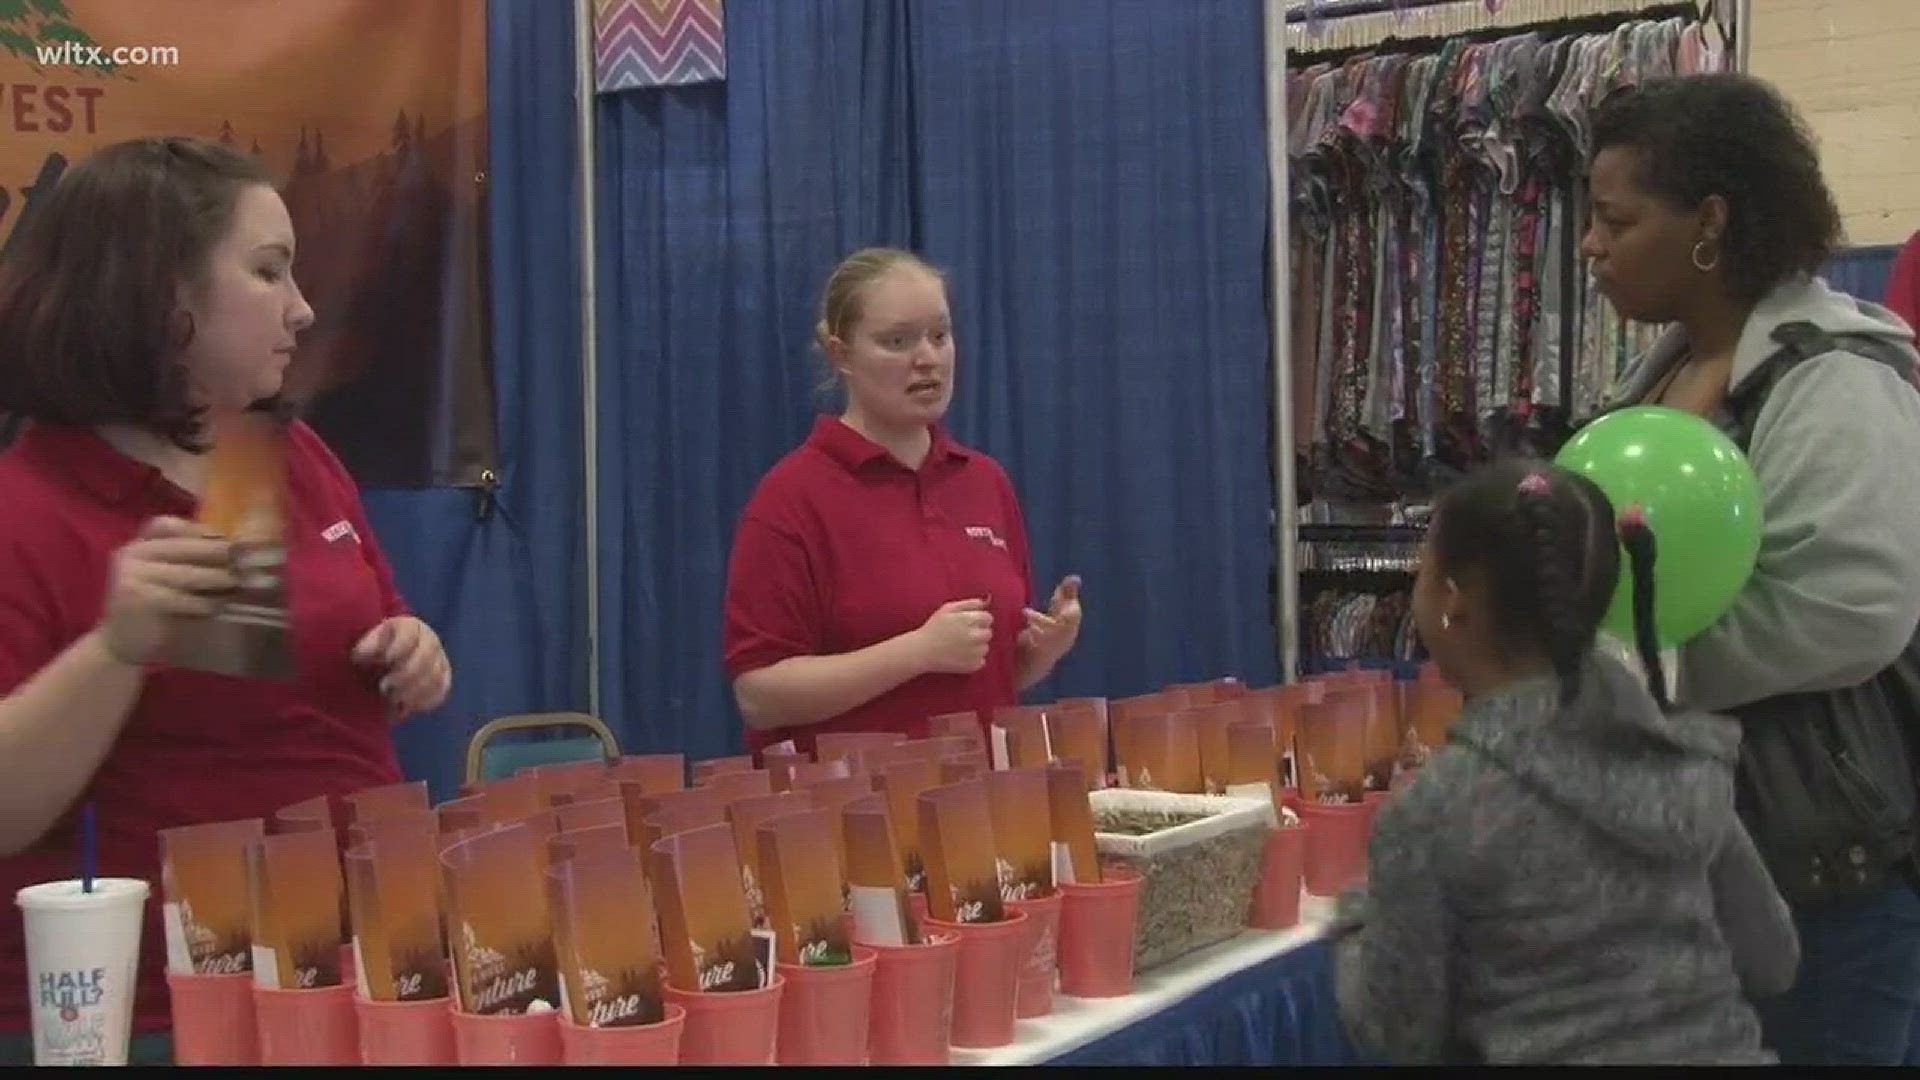 The Midlands Kids fest and Summer Camp Fair kicked off on Saturday.  News19's Michael Fuller reports.